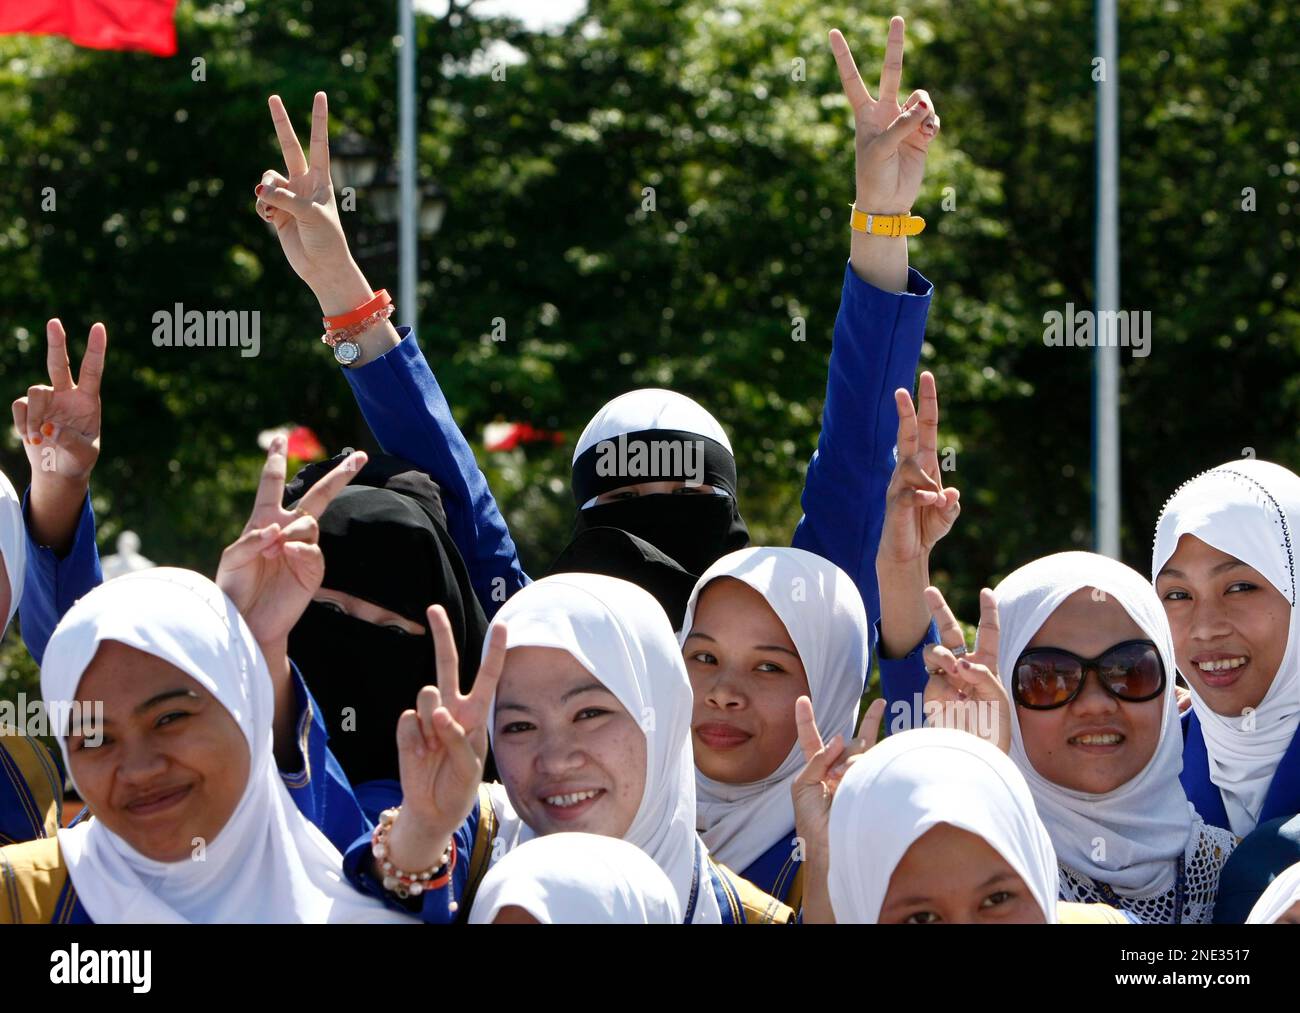 Filipino Muslim students from the Philippine Muslim Teachers College in Marawi in southern Philippines, flash the peace sign as they pose in front of the monument of the Philippines' national hero Dr. Jose P. Rizal Tuesday, March 23, 2010 in Manila, Philippines. The students are in Manila for an educational tour with professor Agakhan Mangondato Sharief (unseen) who campaigned for a provincial board seat as "Osama Binladen" but lost in Lanao province in southern Philippines in 2007. (AP Photo/Bullit Marquez) Stock Photo